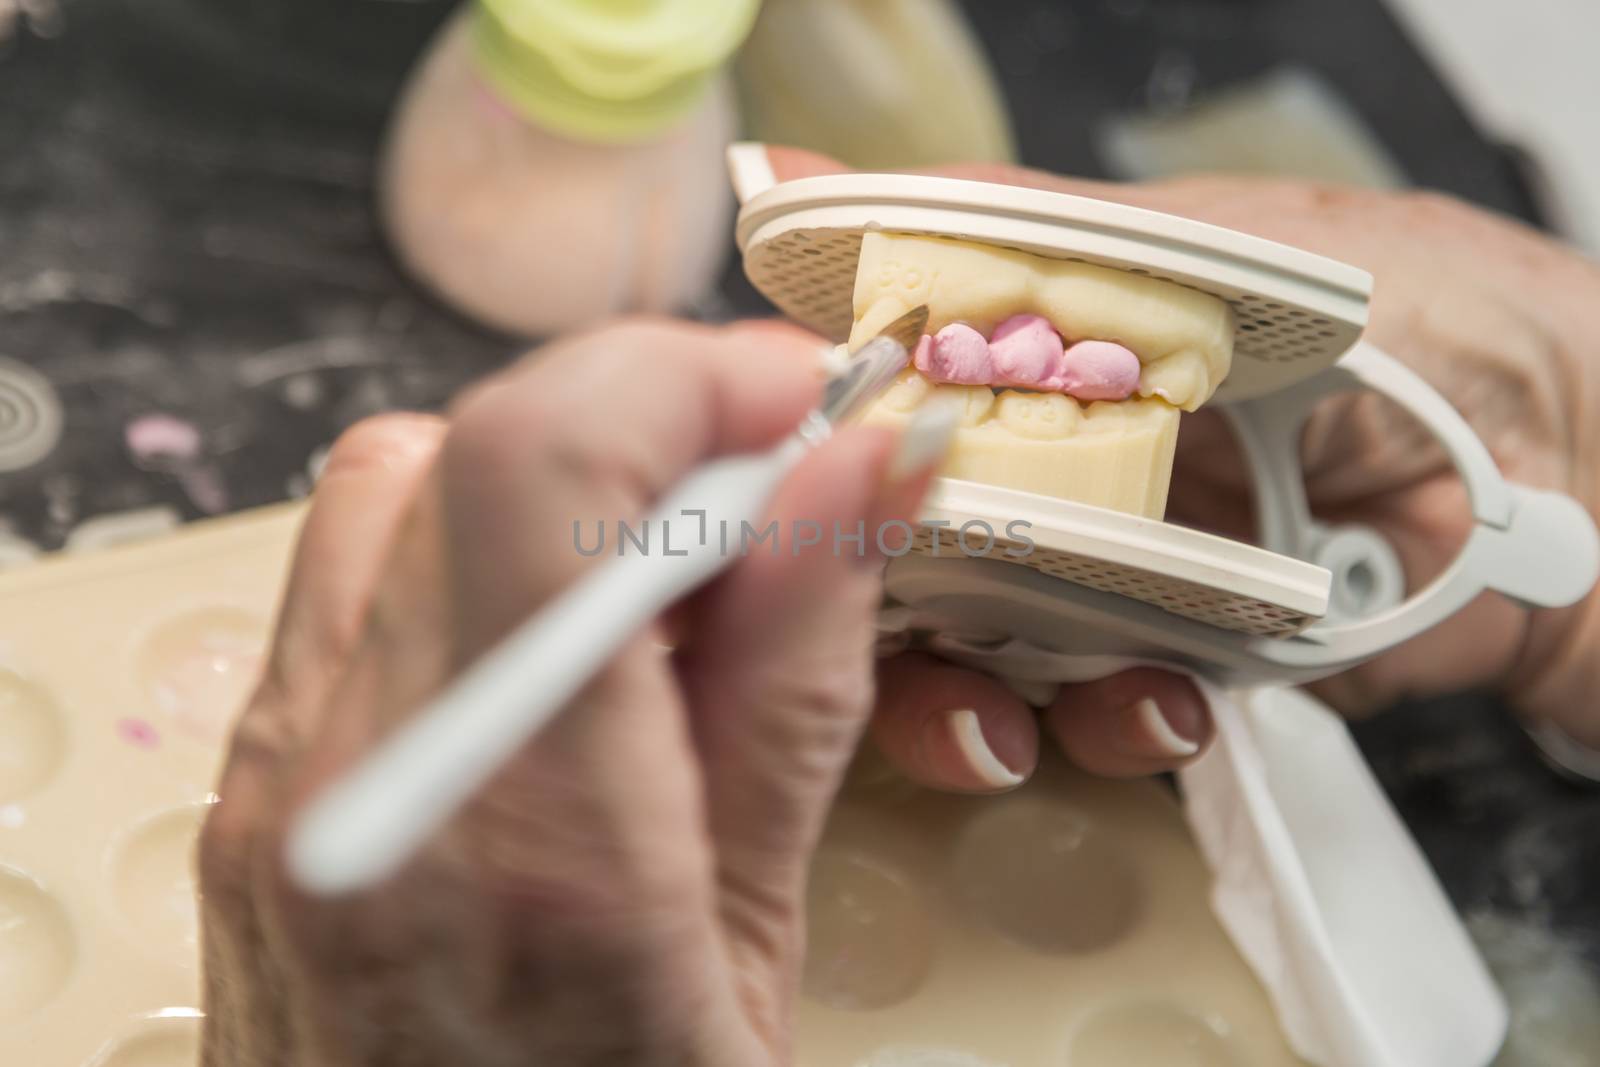 Female Dental Technician Applying Porcelain To A 3D Printed Implant Mold In The Lab. by Feverpitched